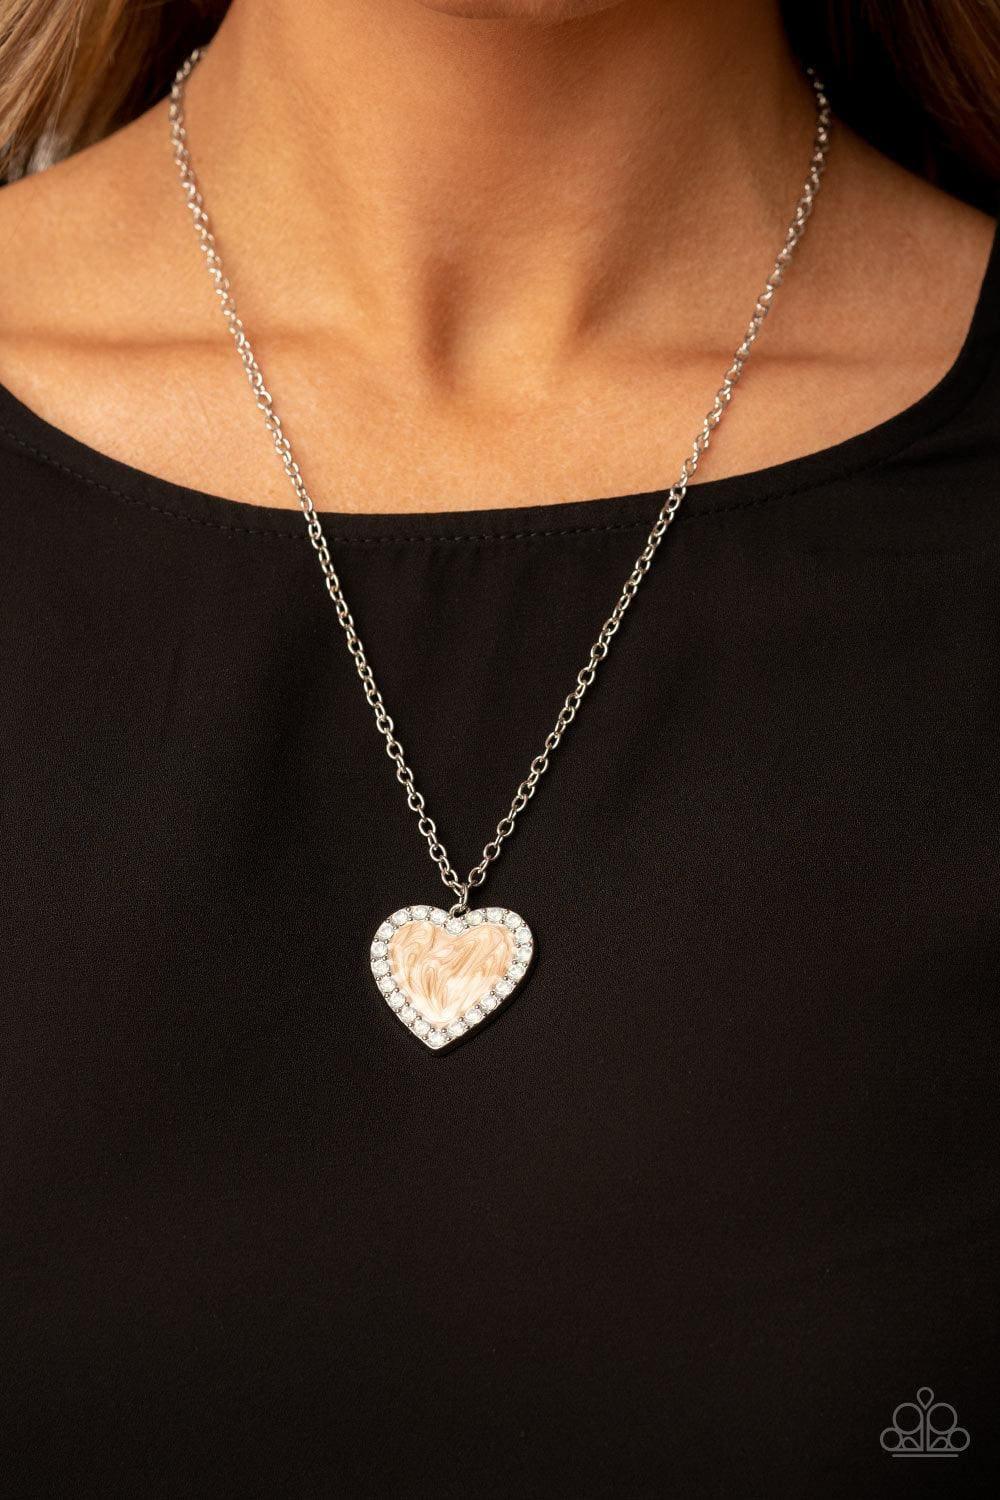 Paparazzi Accessories - Heart Full Of Luster - Brown Necklace - Bling by JessieK